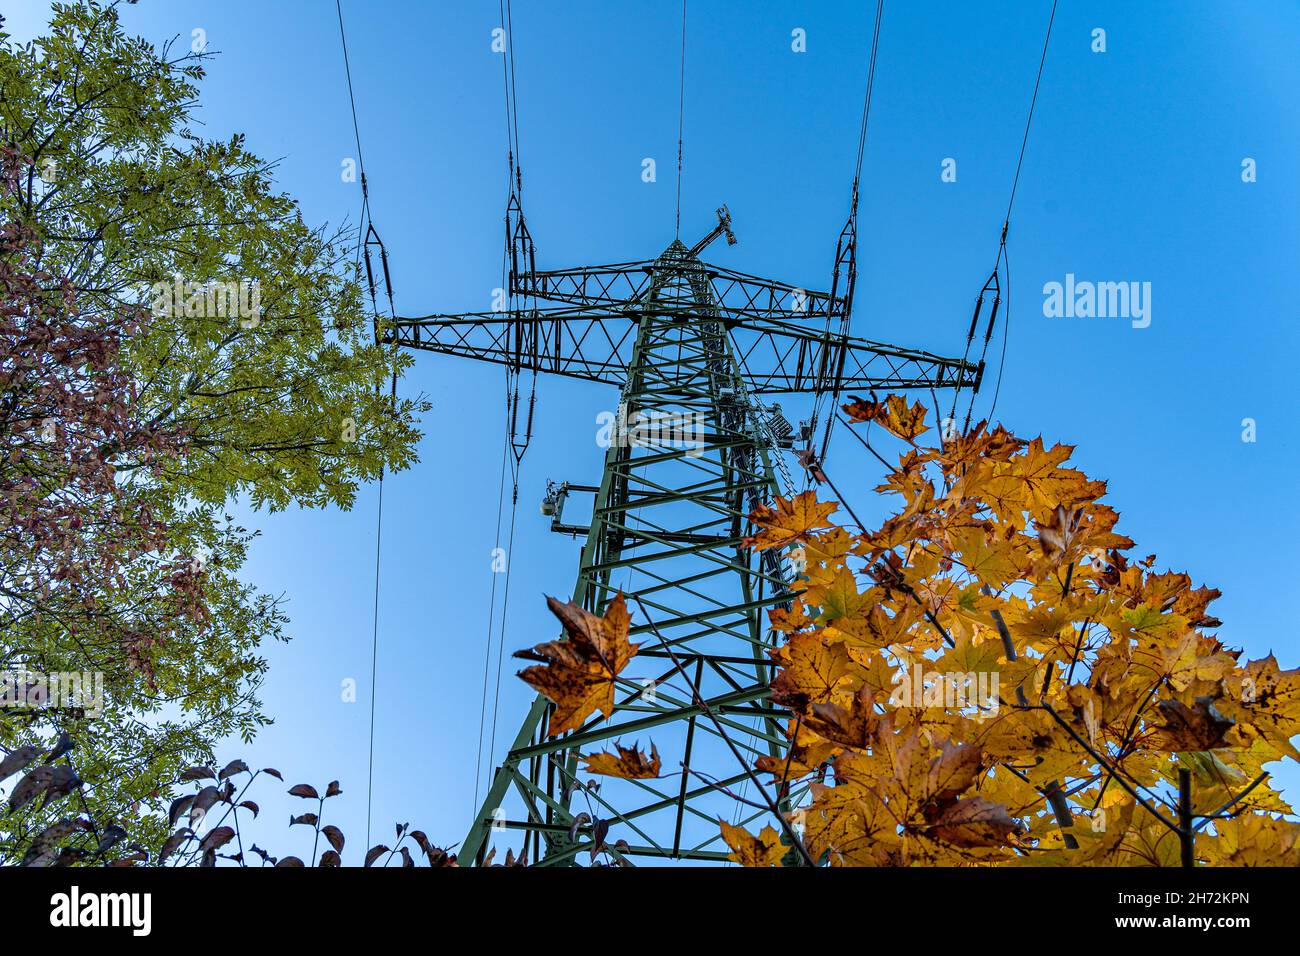 High electricity pylon near trees with golden leaves Stock Photo